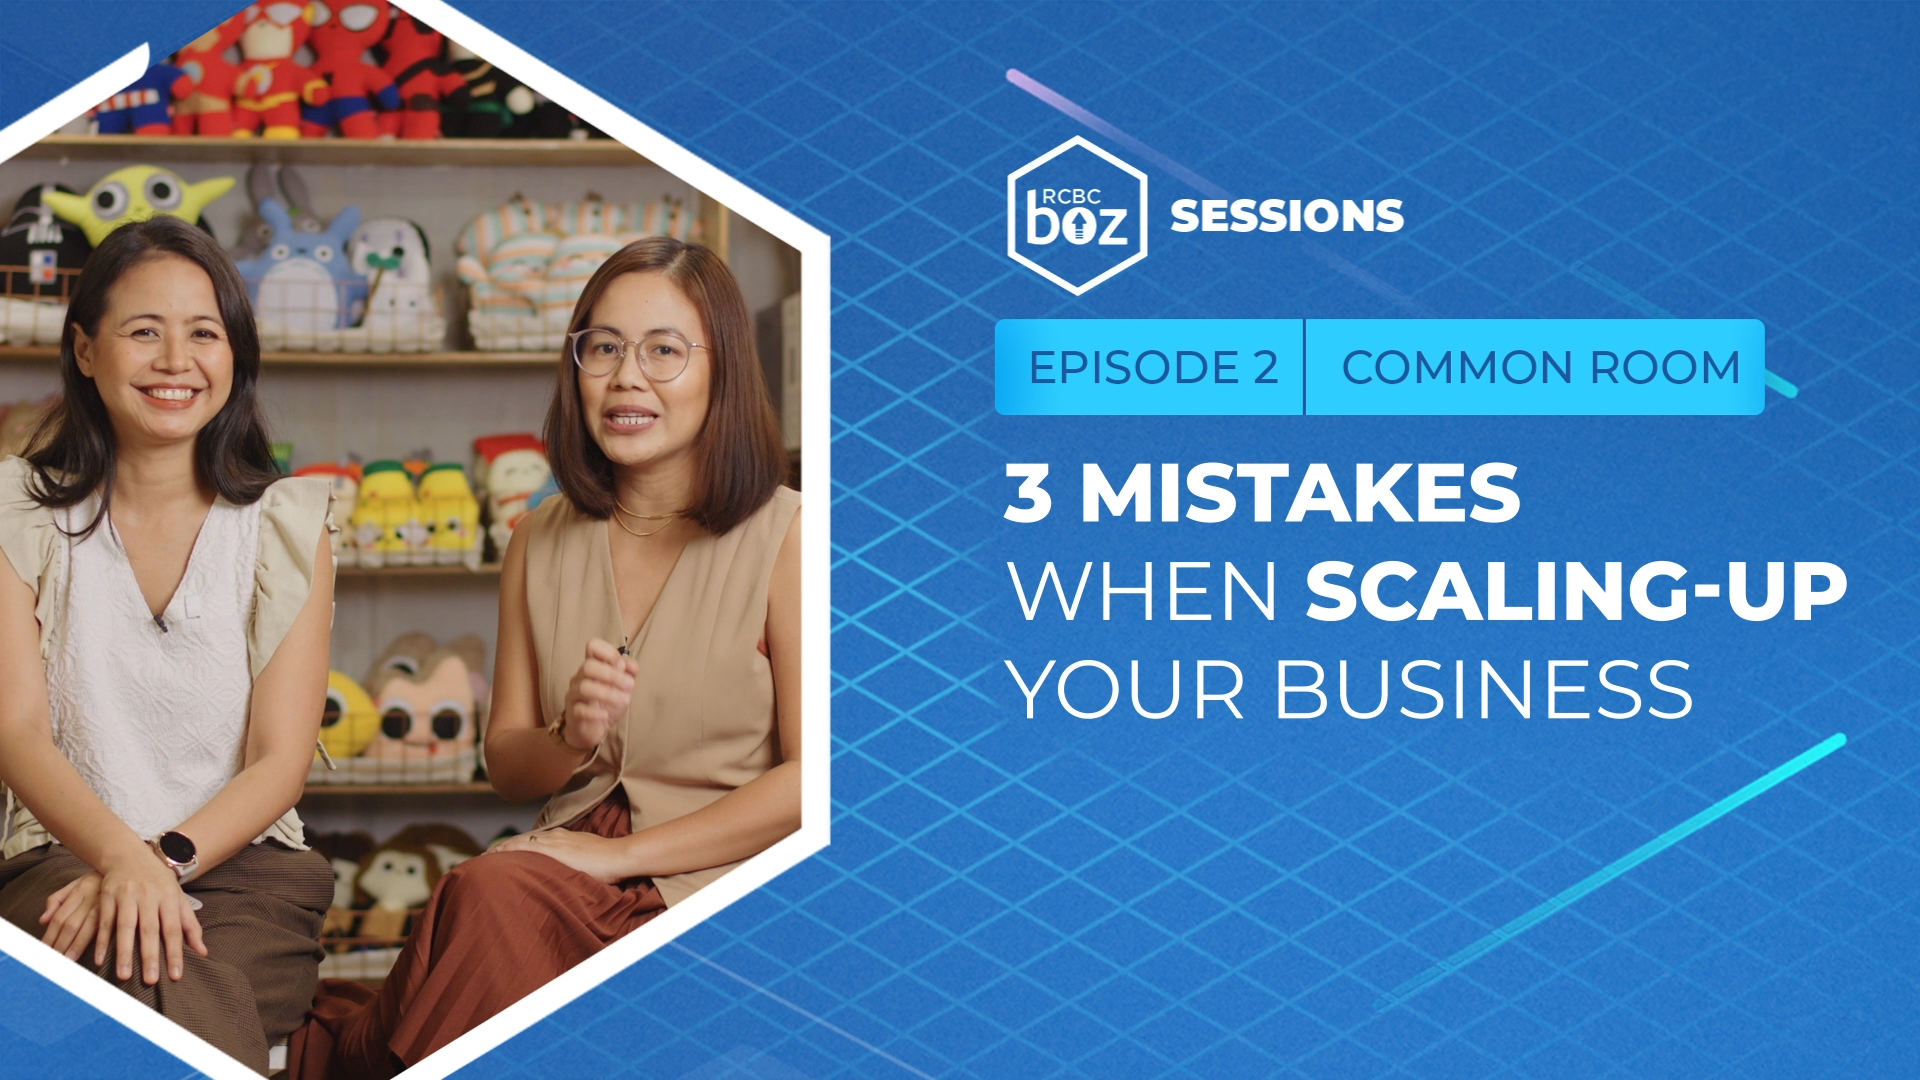 RCBC Boz Sessions: 3 Mistakes When Scaling-Up Your Business ft. Common Room PH